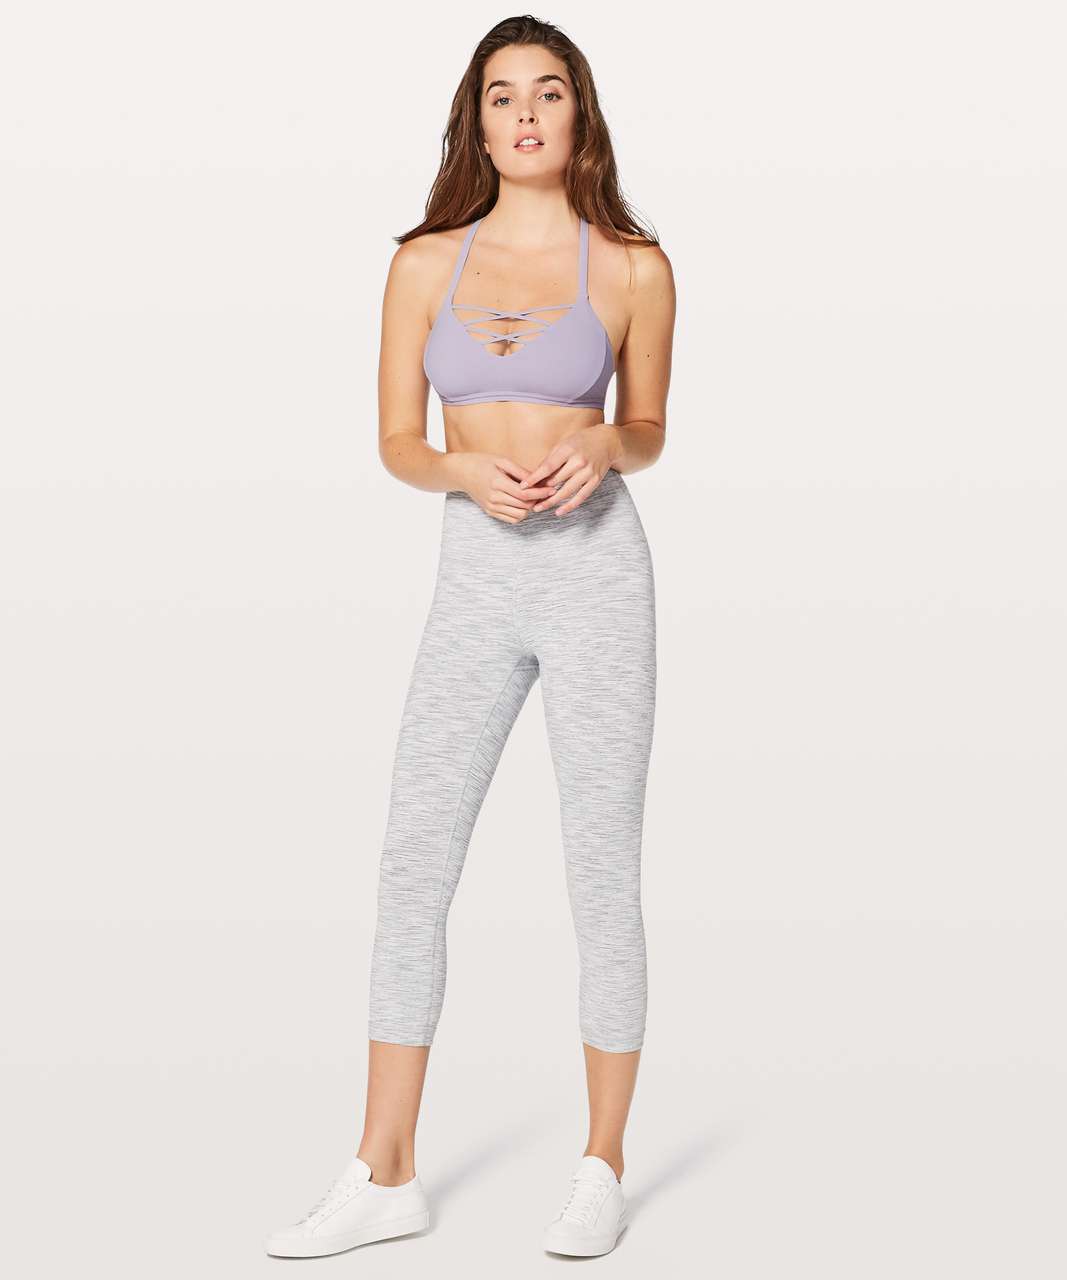 Lululemon Laced With Intent Bra - Misty Moon